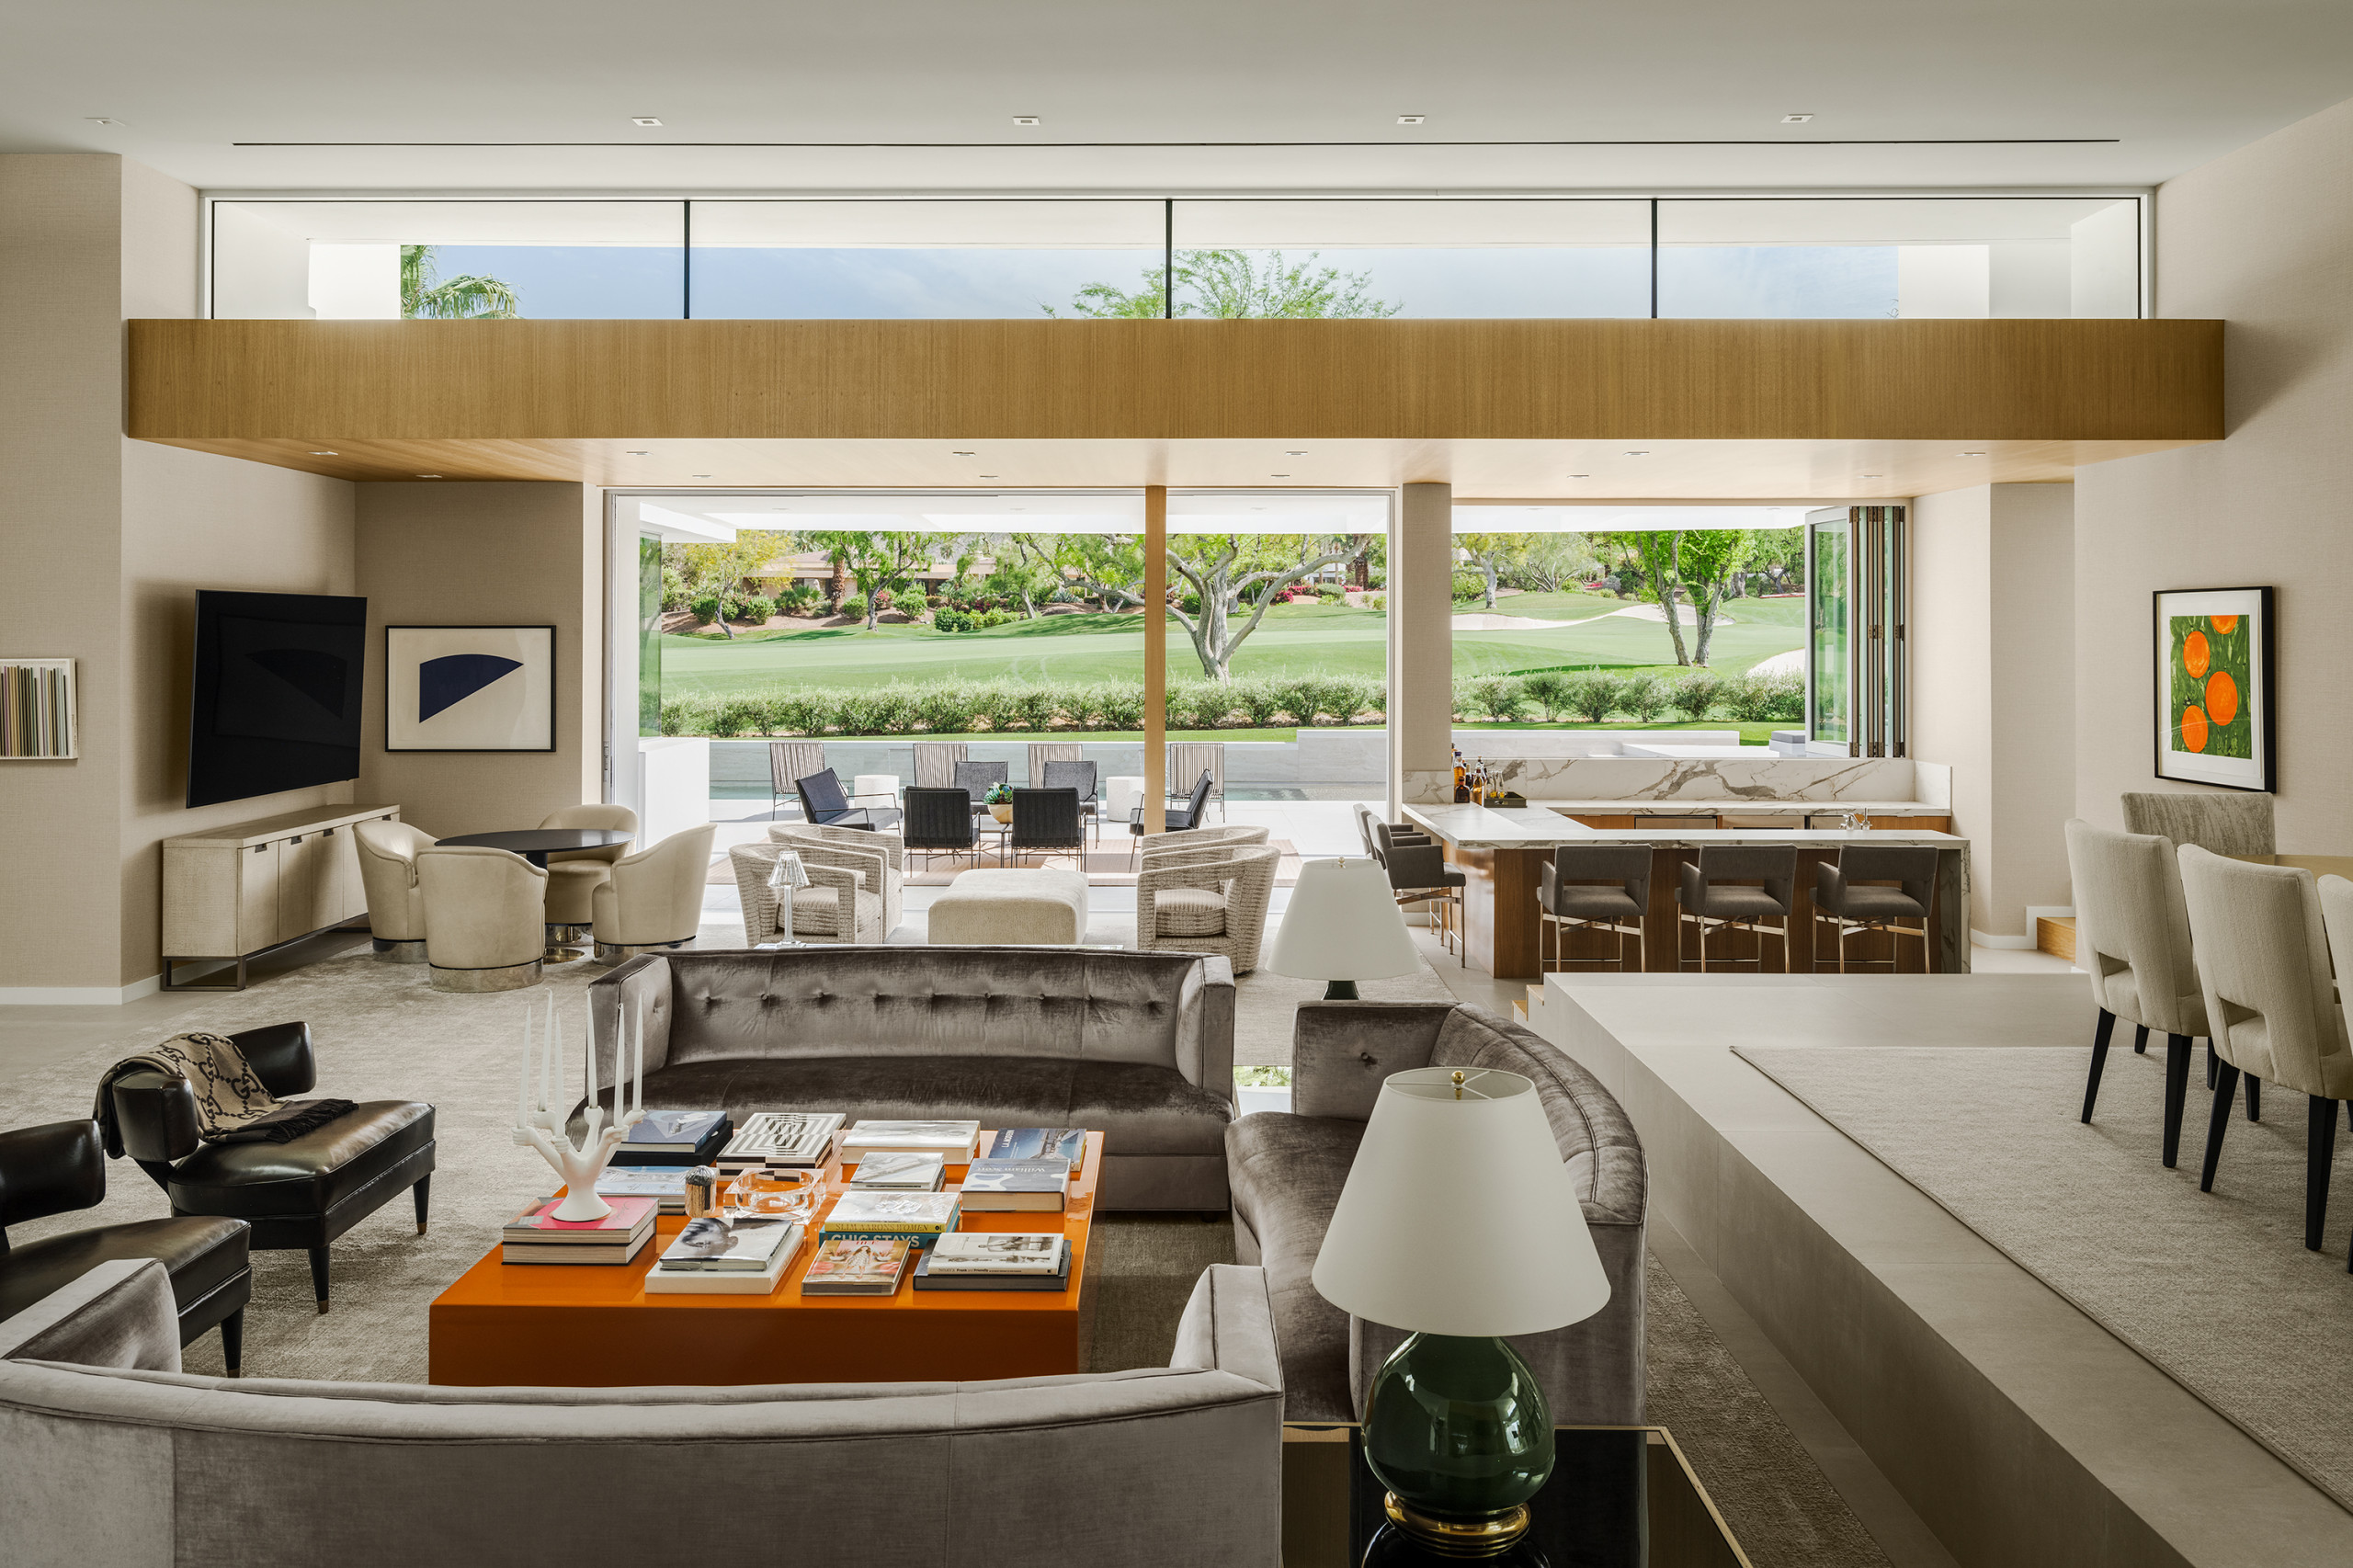 Indian Wells Contemporary